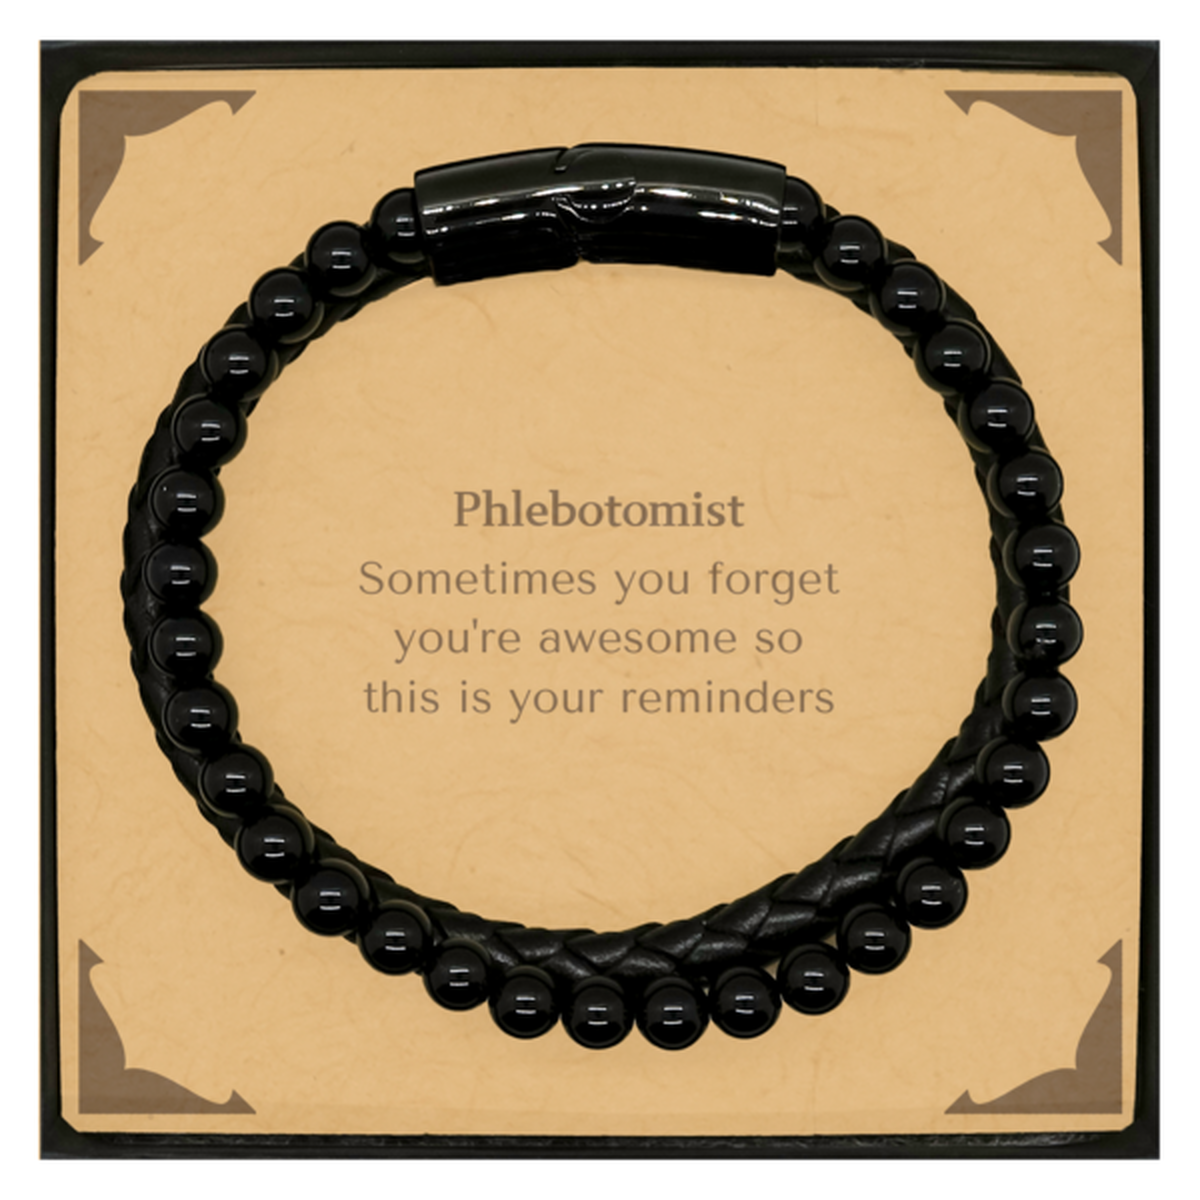 Sentimental Phlebotomist Stone Leather Bracelets, Phlebotomist Sometimes you forget you're awesome so this is your reminders, Graduation Christmas Birthday Gifts for Phlebotomist, Men, Women, Coworkers